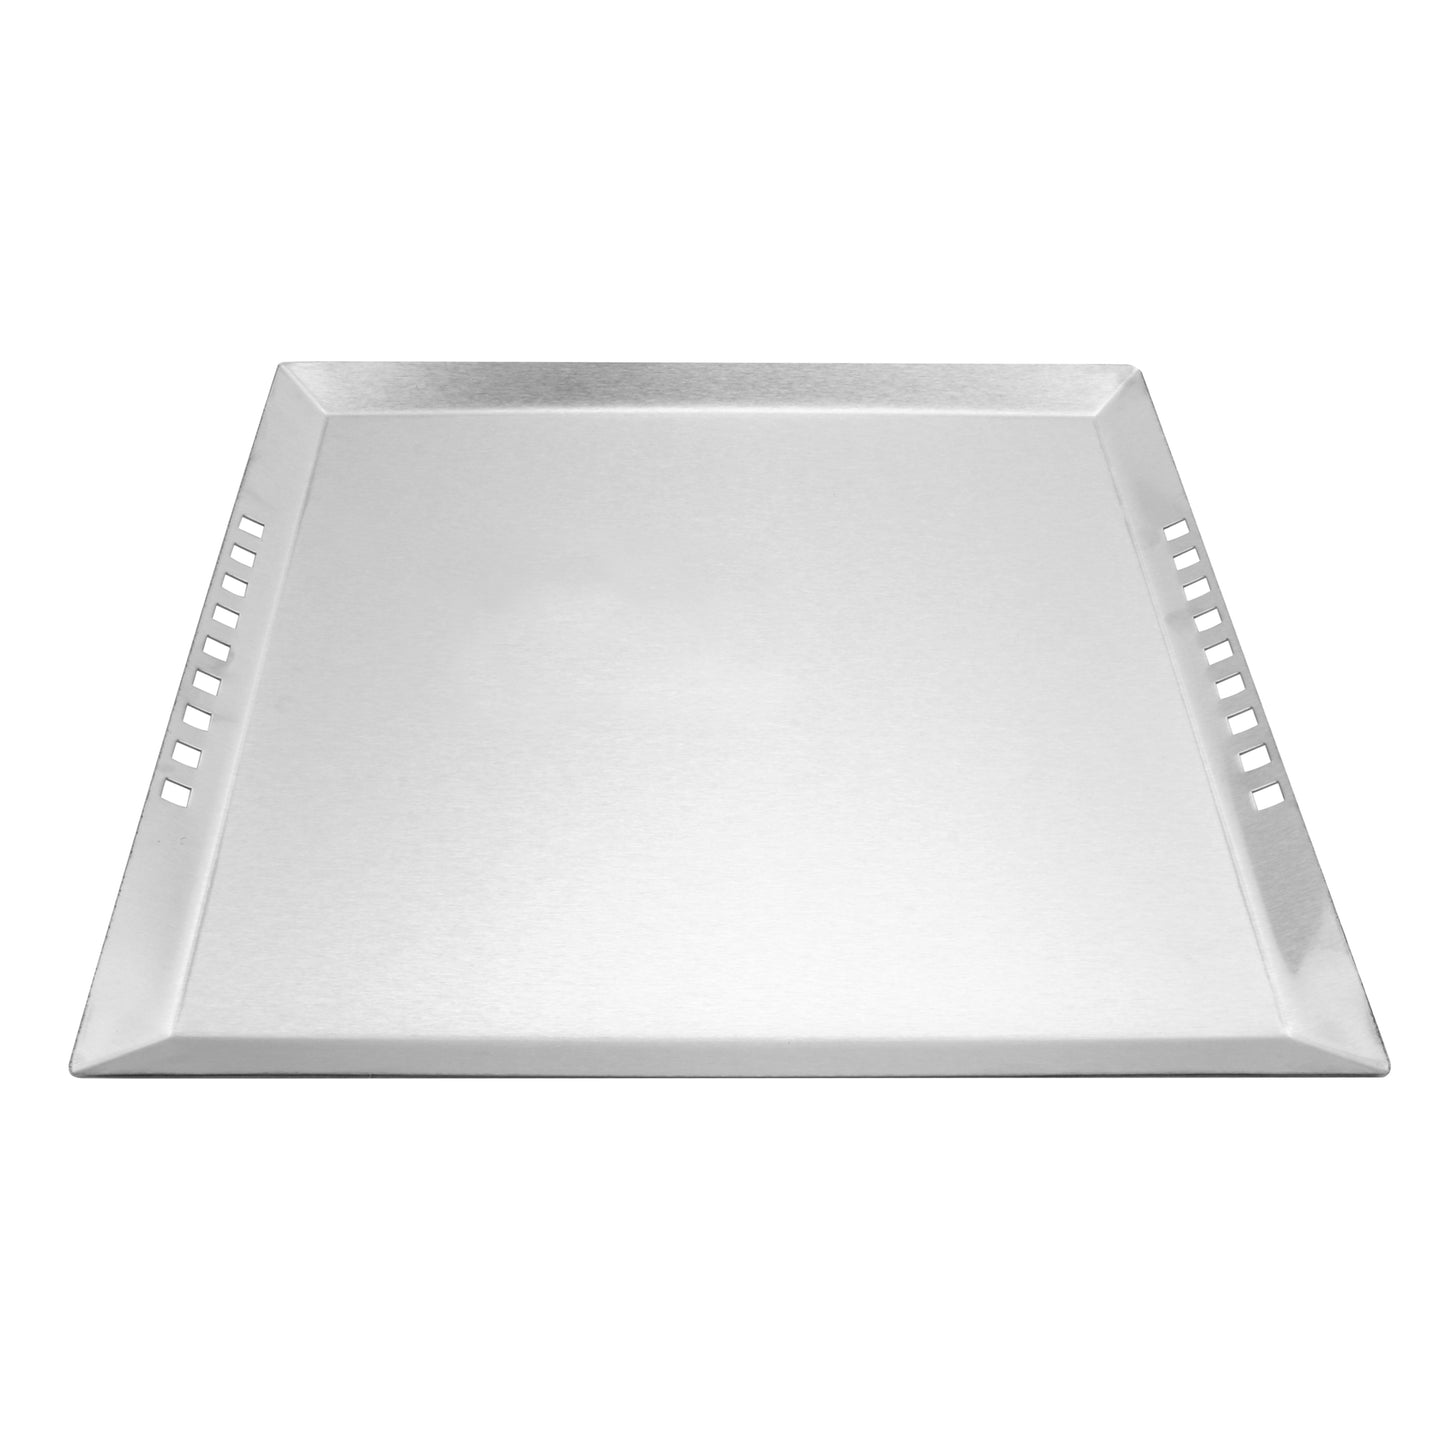 Strata Square Serving Tray, 15.5" x 15.5", Stainless Steel, fits ST11602116, G.E.T. STRATA BUFFET SYSTEM ST11712016